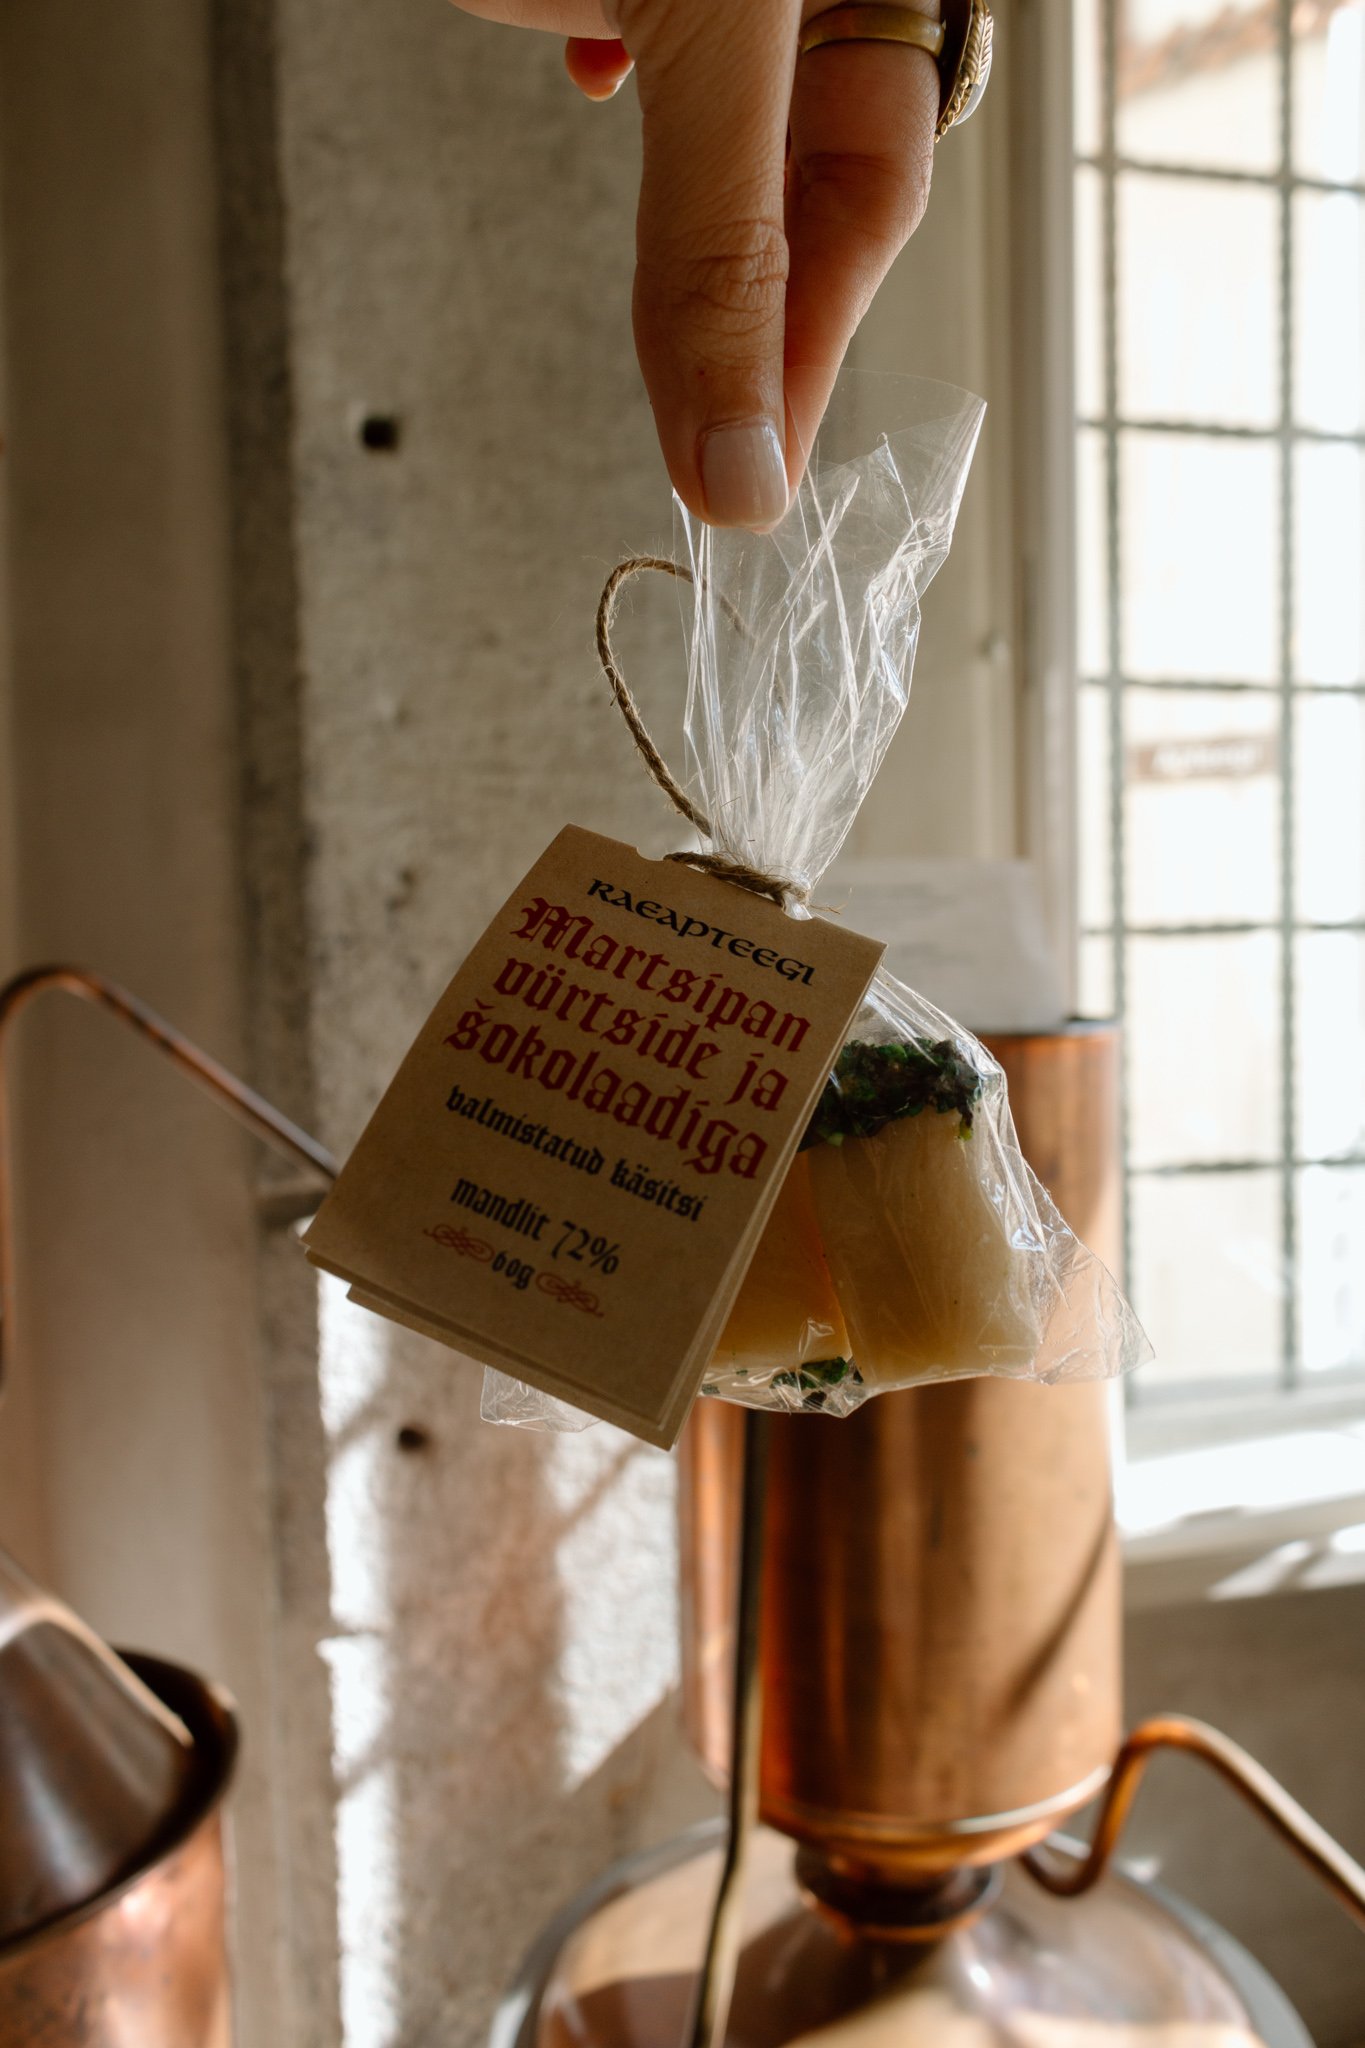 infamous love potions from Tallinn